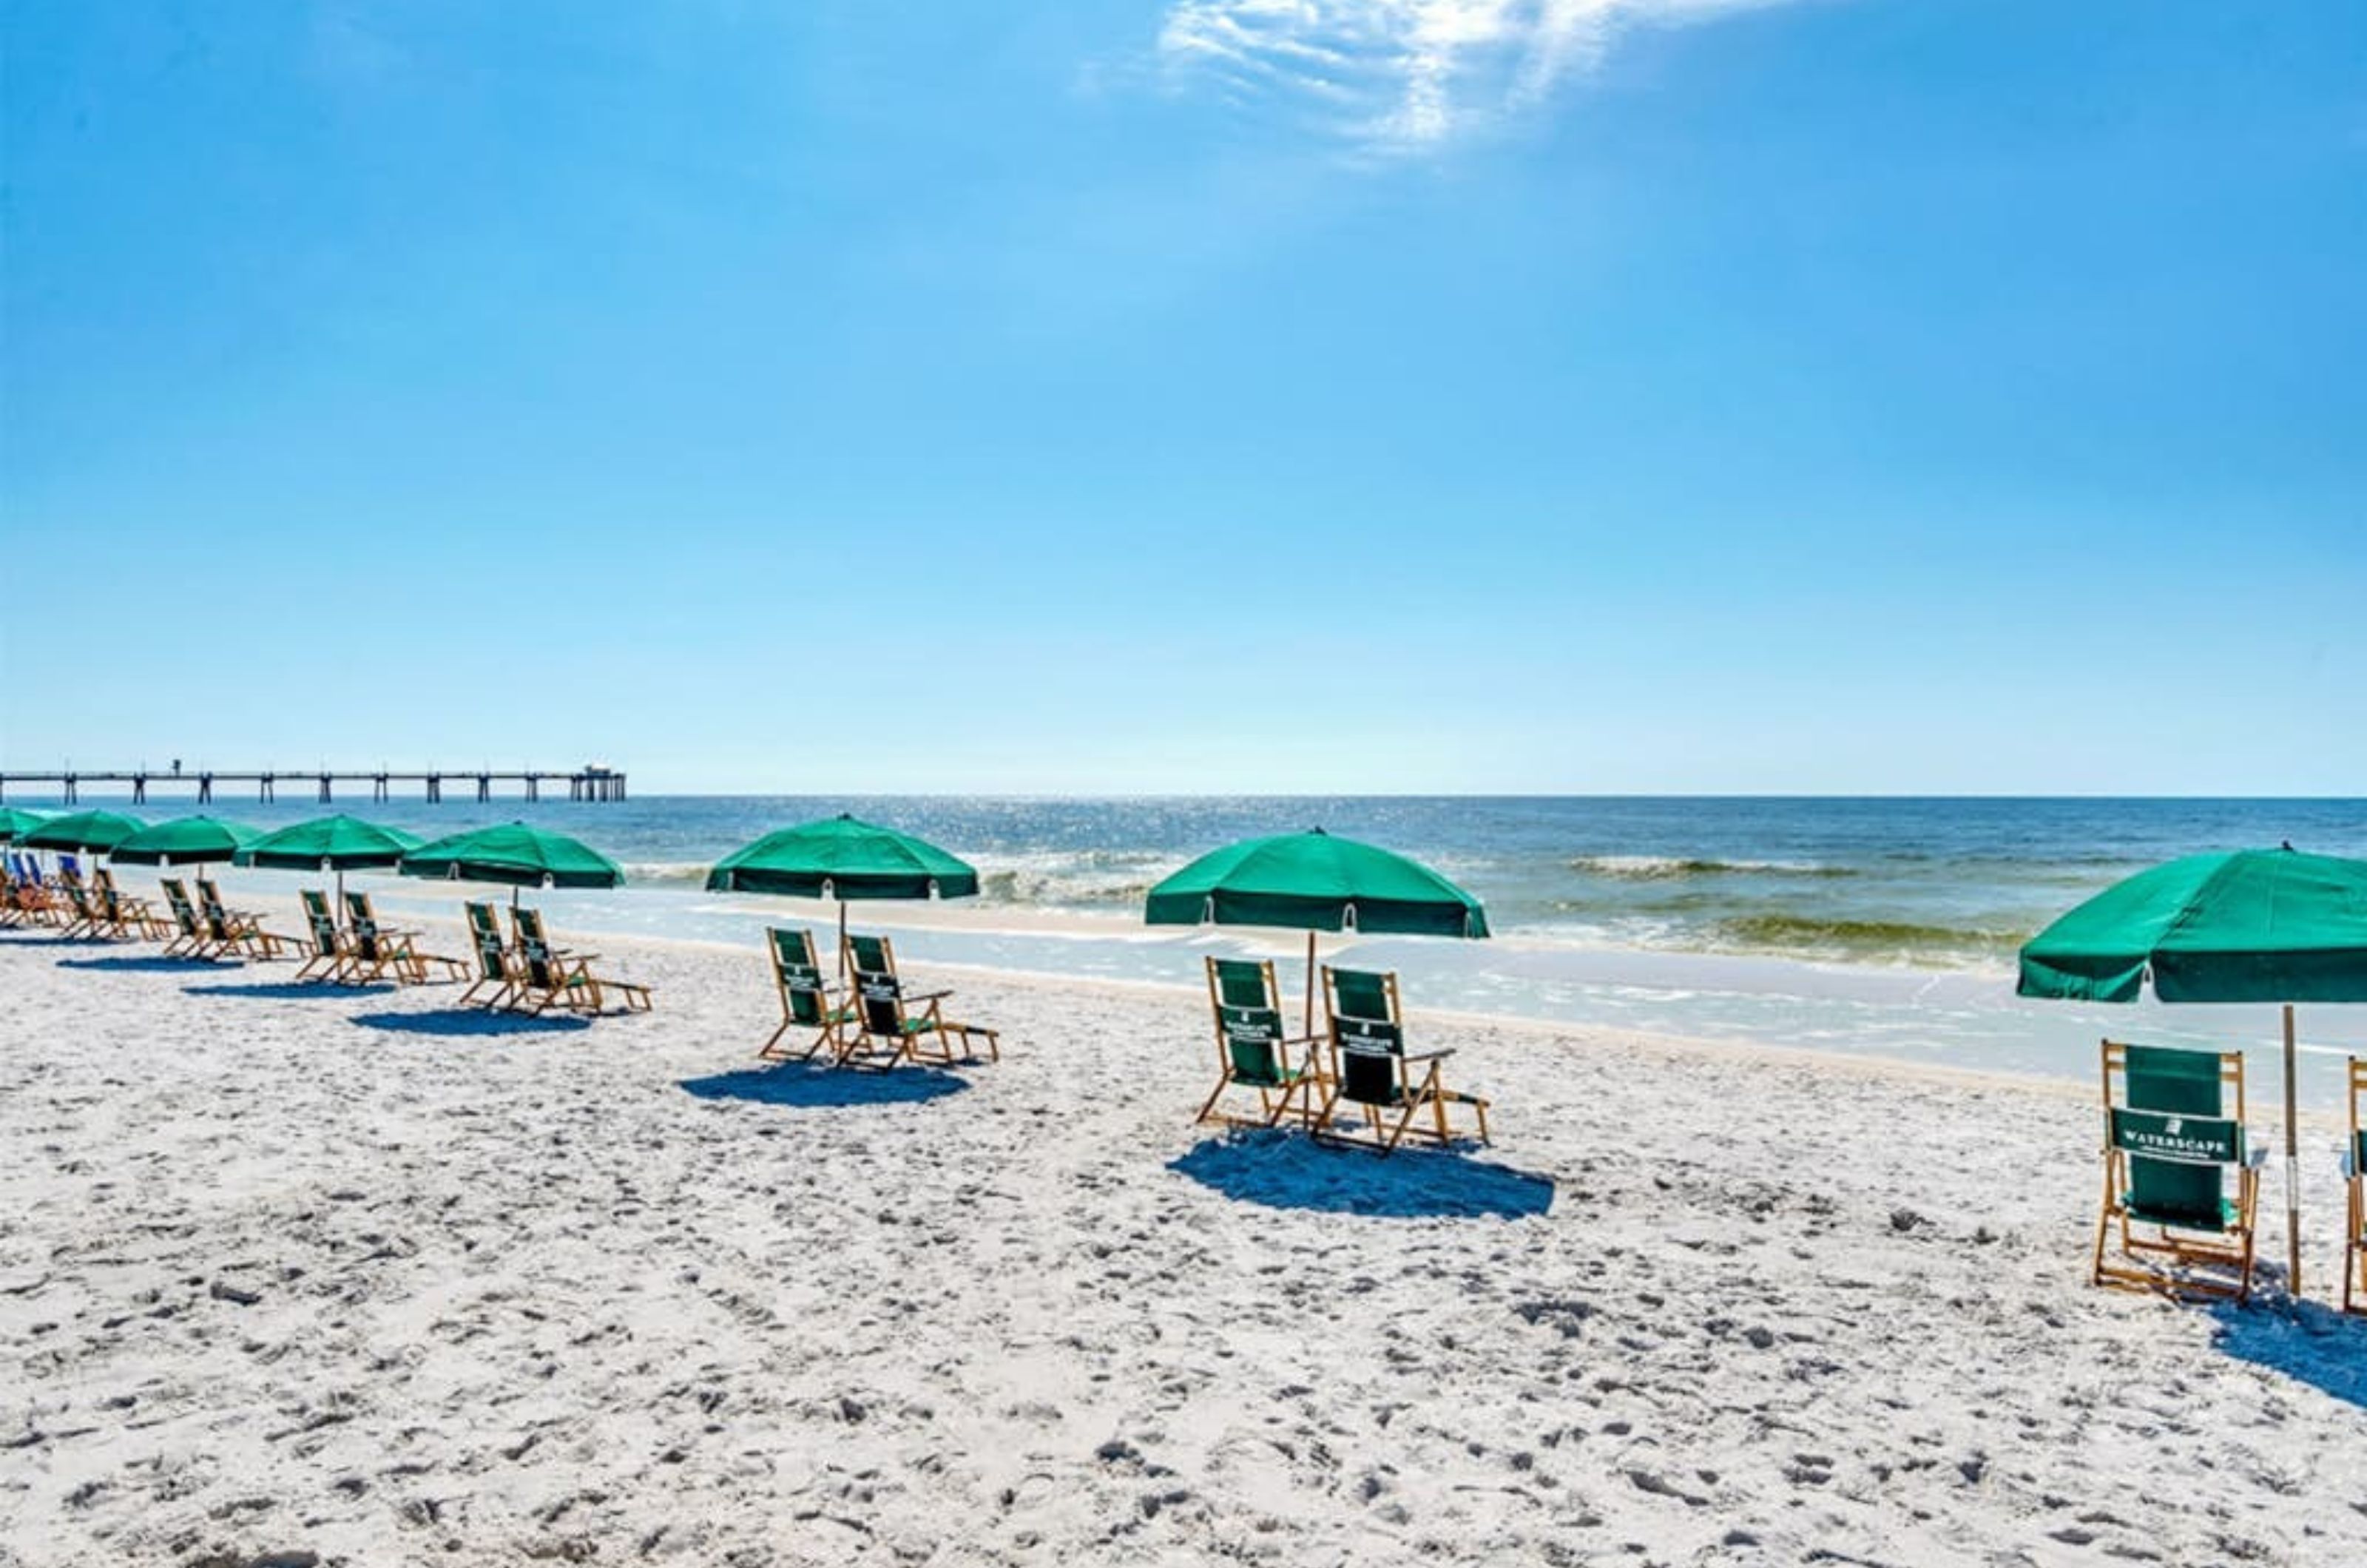 Lounge chairs and umbrellas on the beach in Fort Walton Beach Florida 